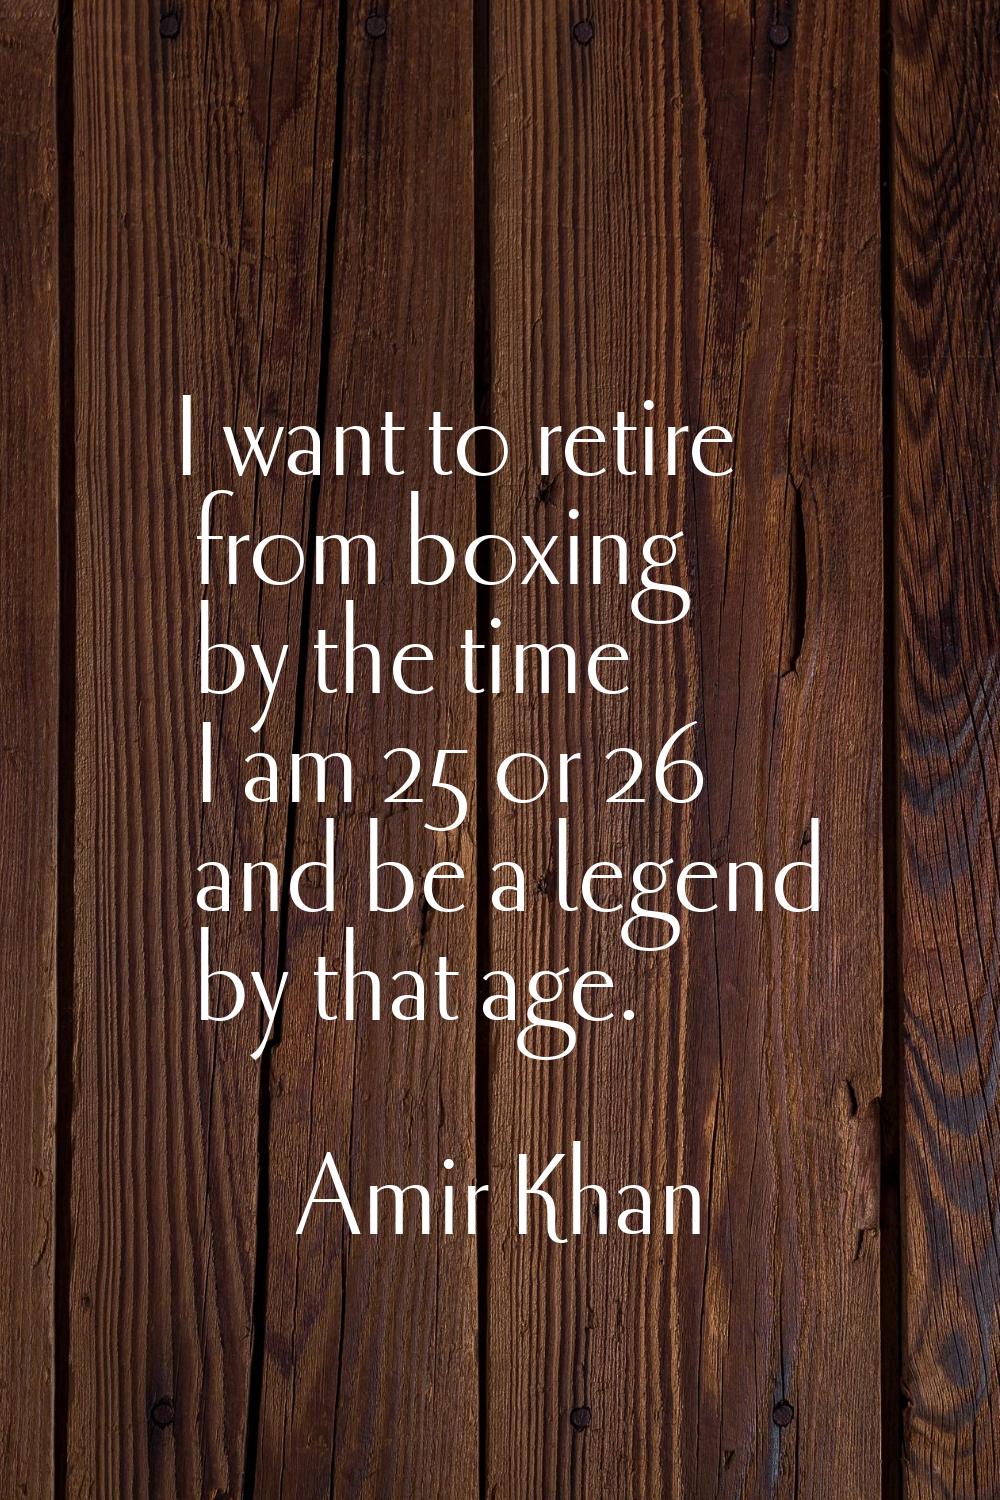 I want to retire from boxing by the time I am 25 or 26 and be a legend by that age.